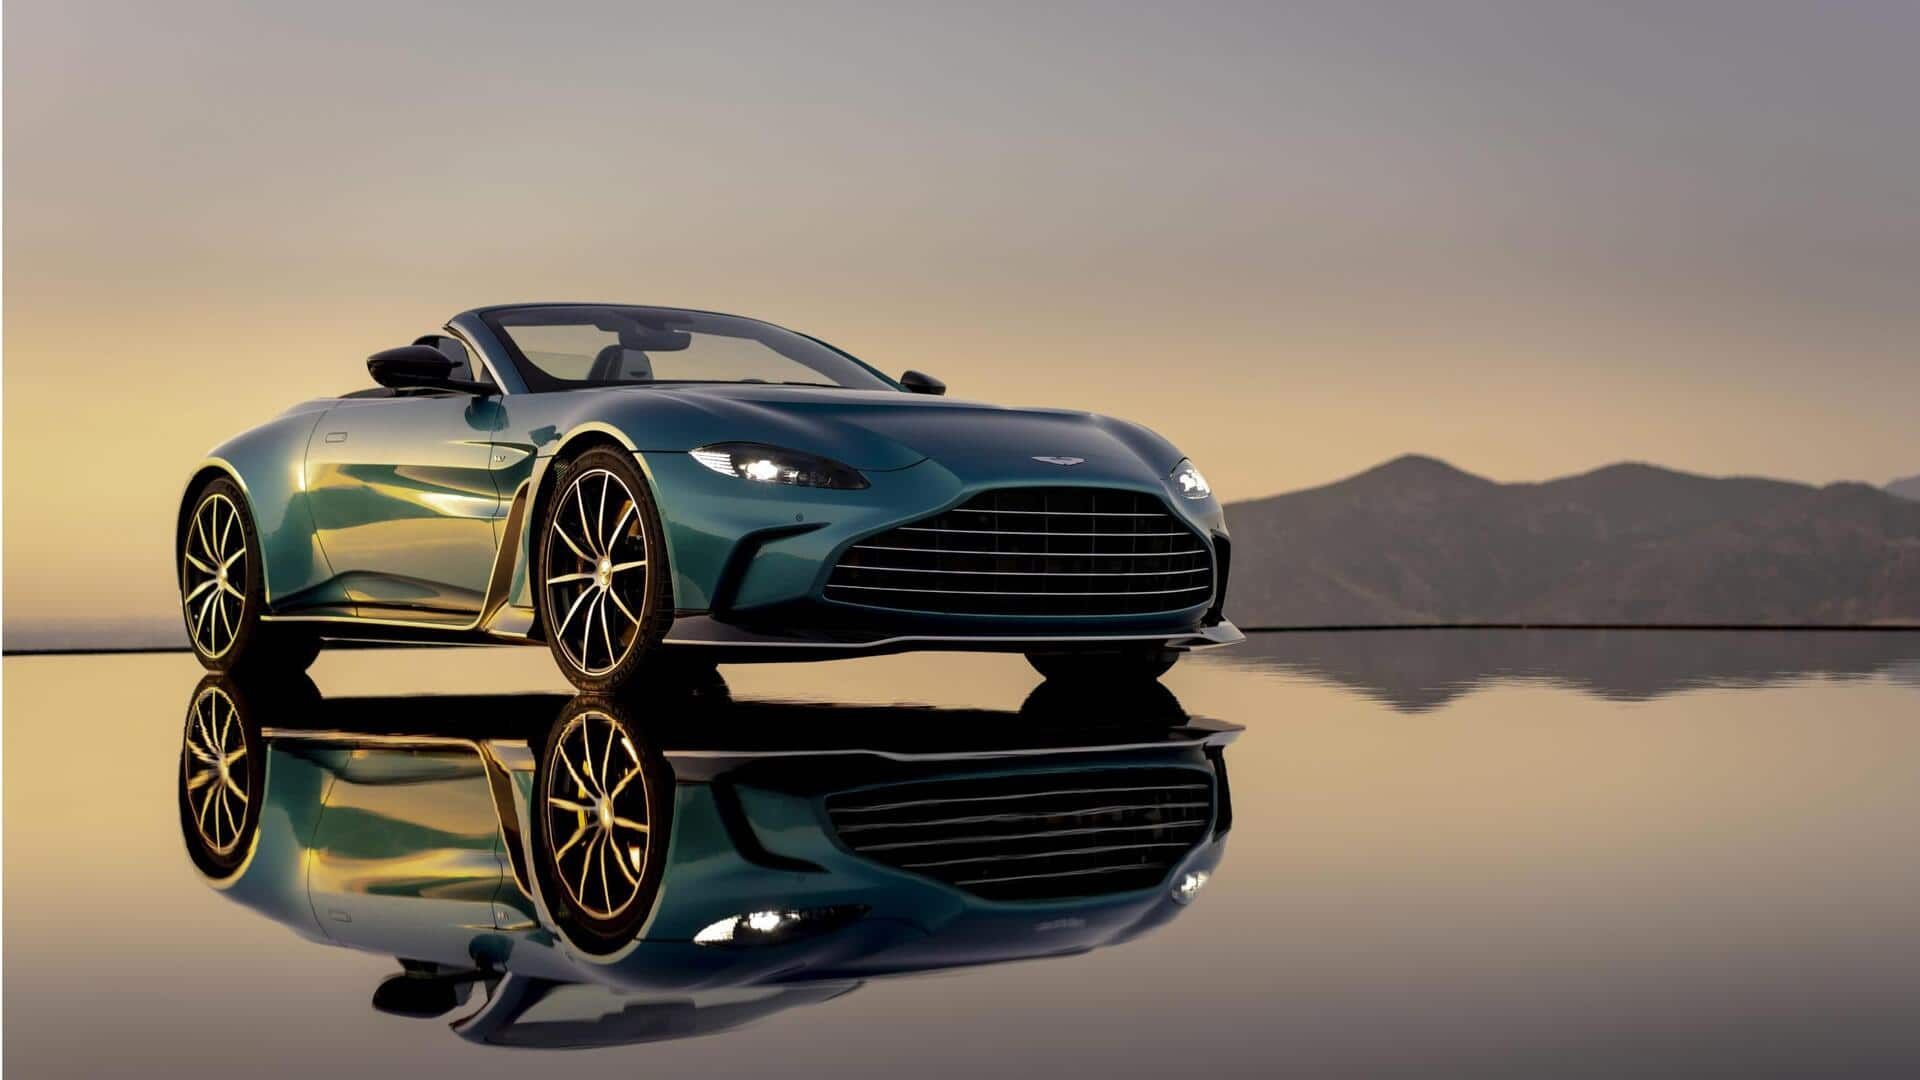 Prior to debut, 2024 Aston Martin Vantage teased: Expected features